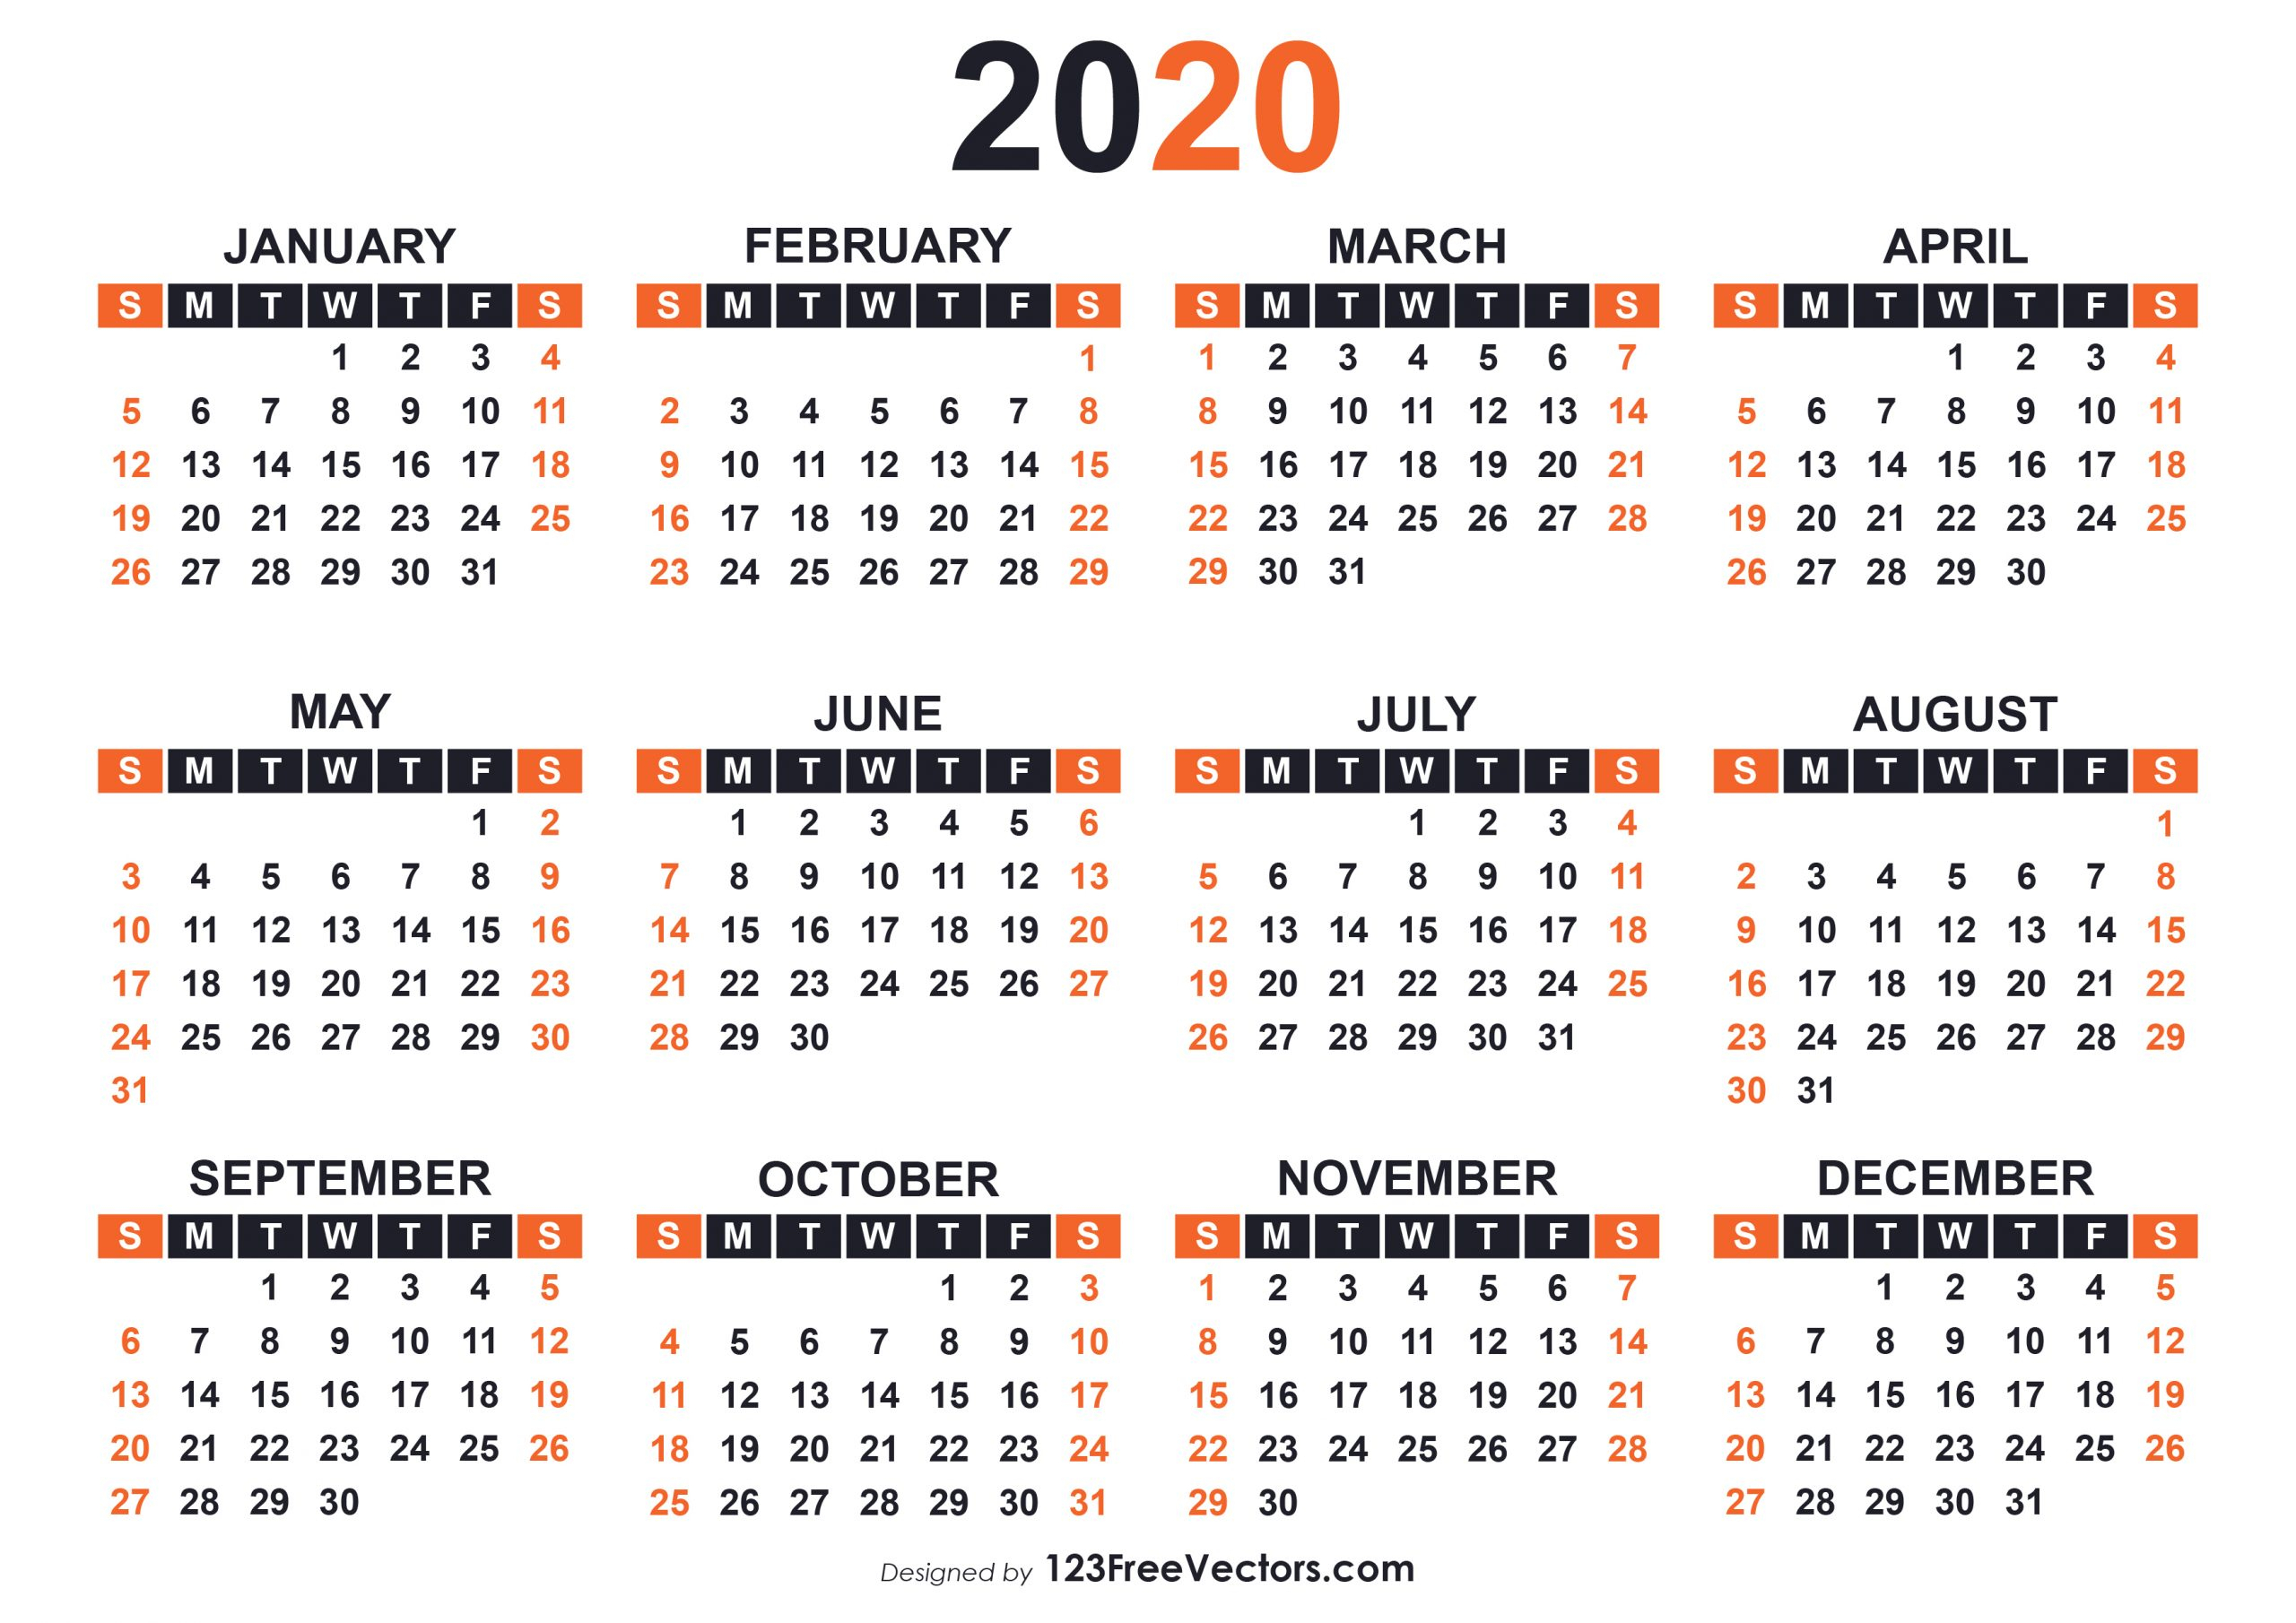 Get Print Free Calendars Without Downloading 2020 | Calendar Printables within Calendars To Print Without Downloading